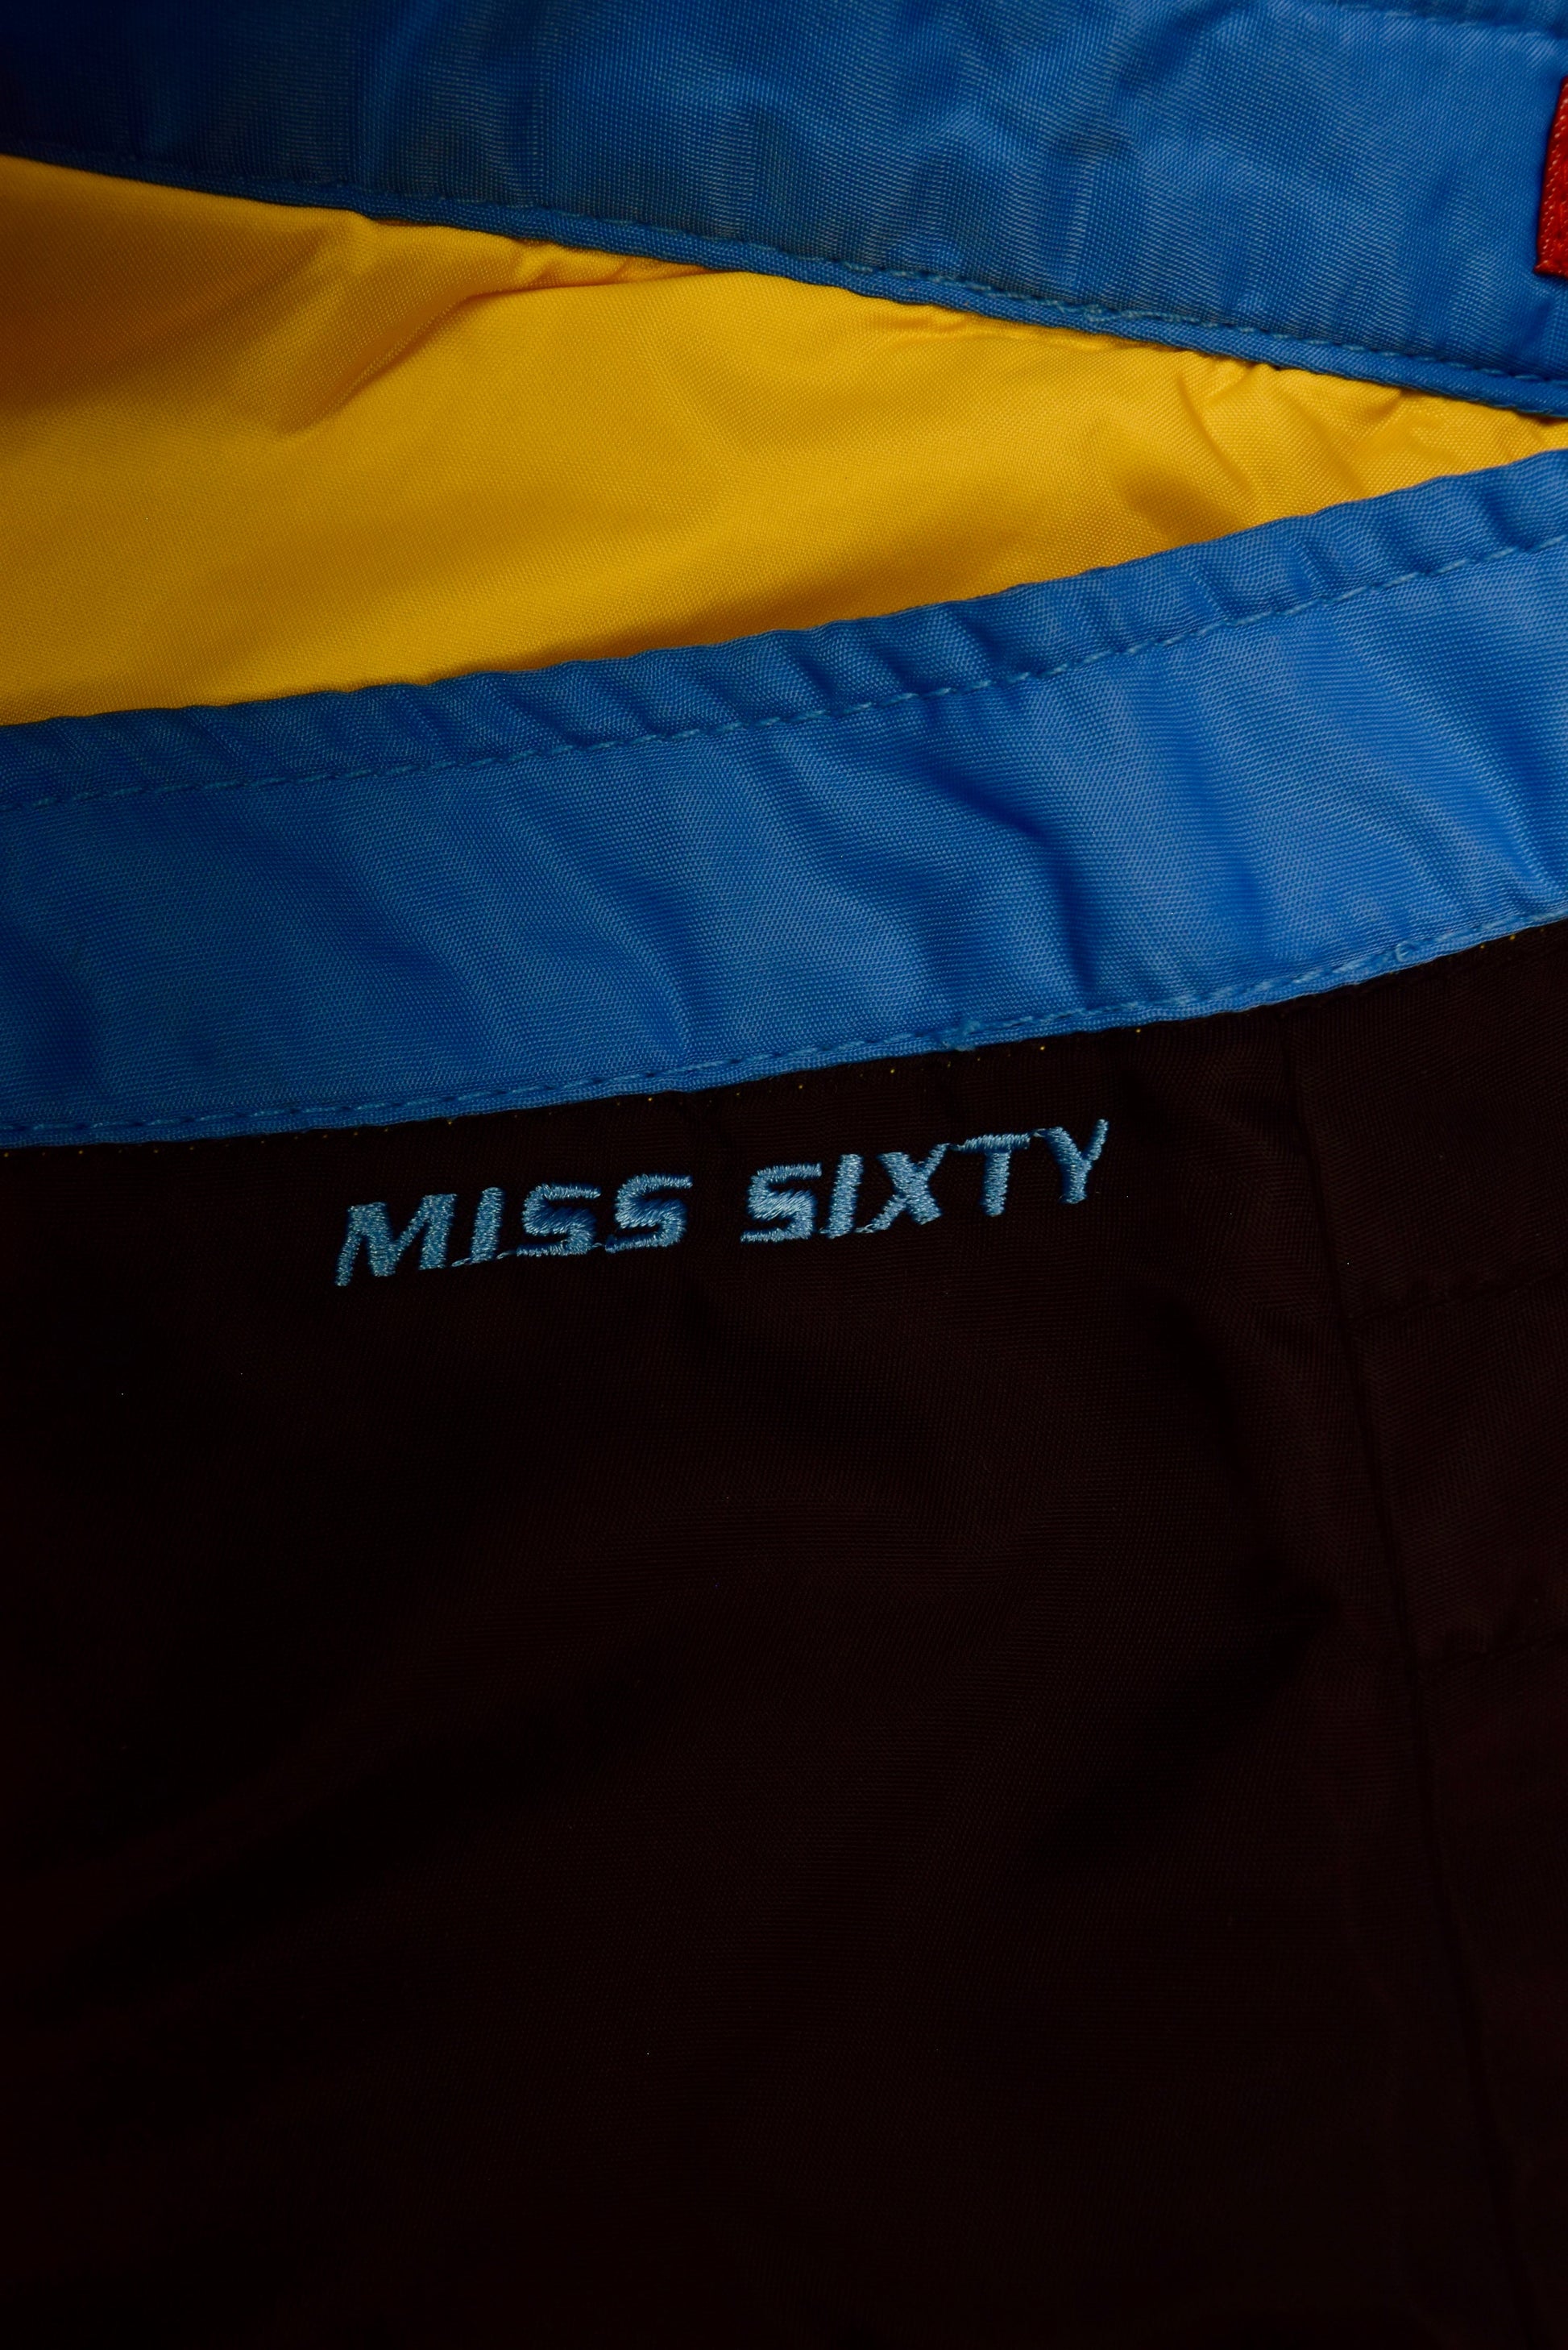 Y2K Miss Sixty Skirt Technical - Racing Aesthetic Size M Black Blue Yellow